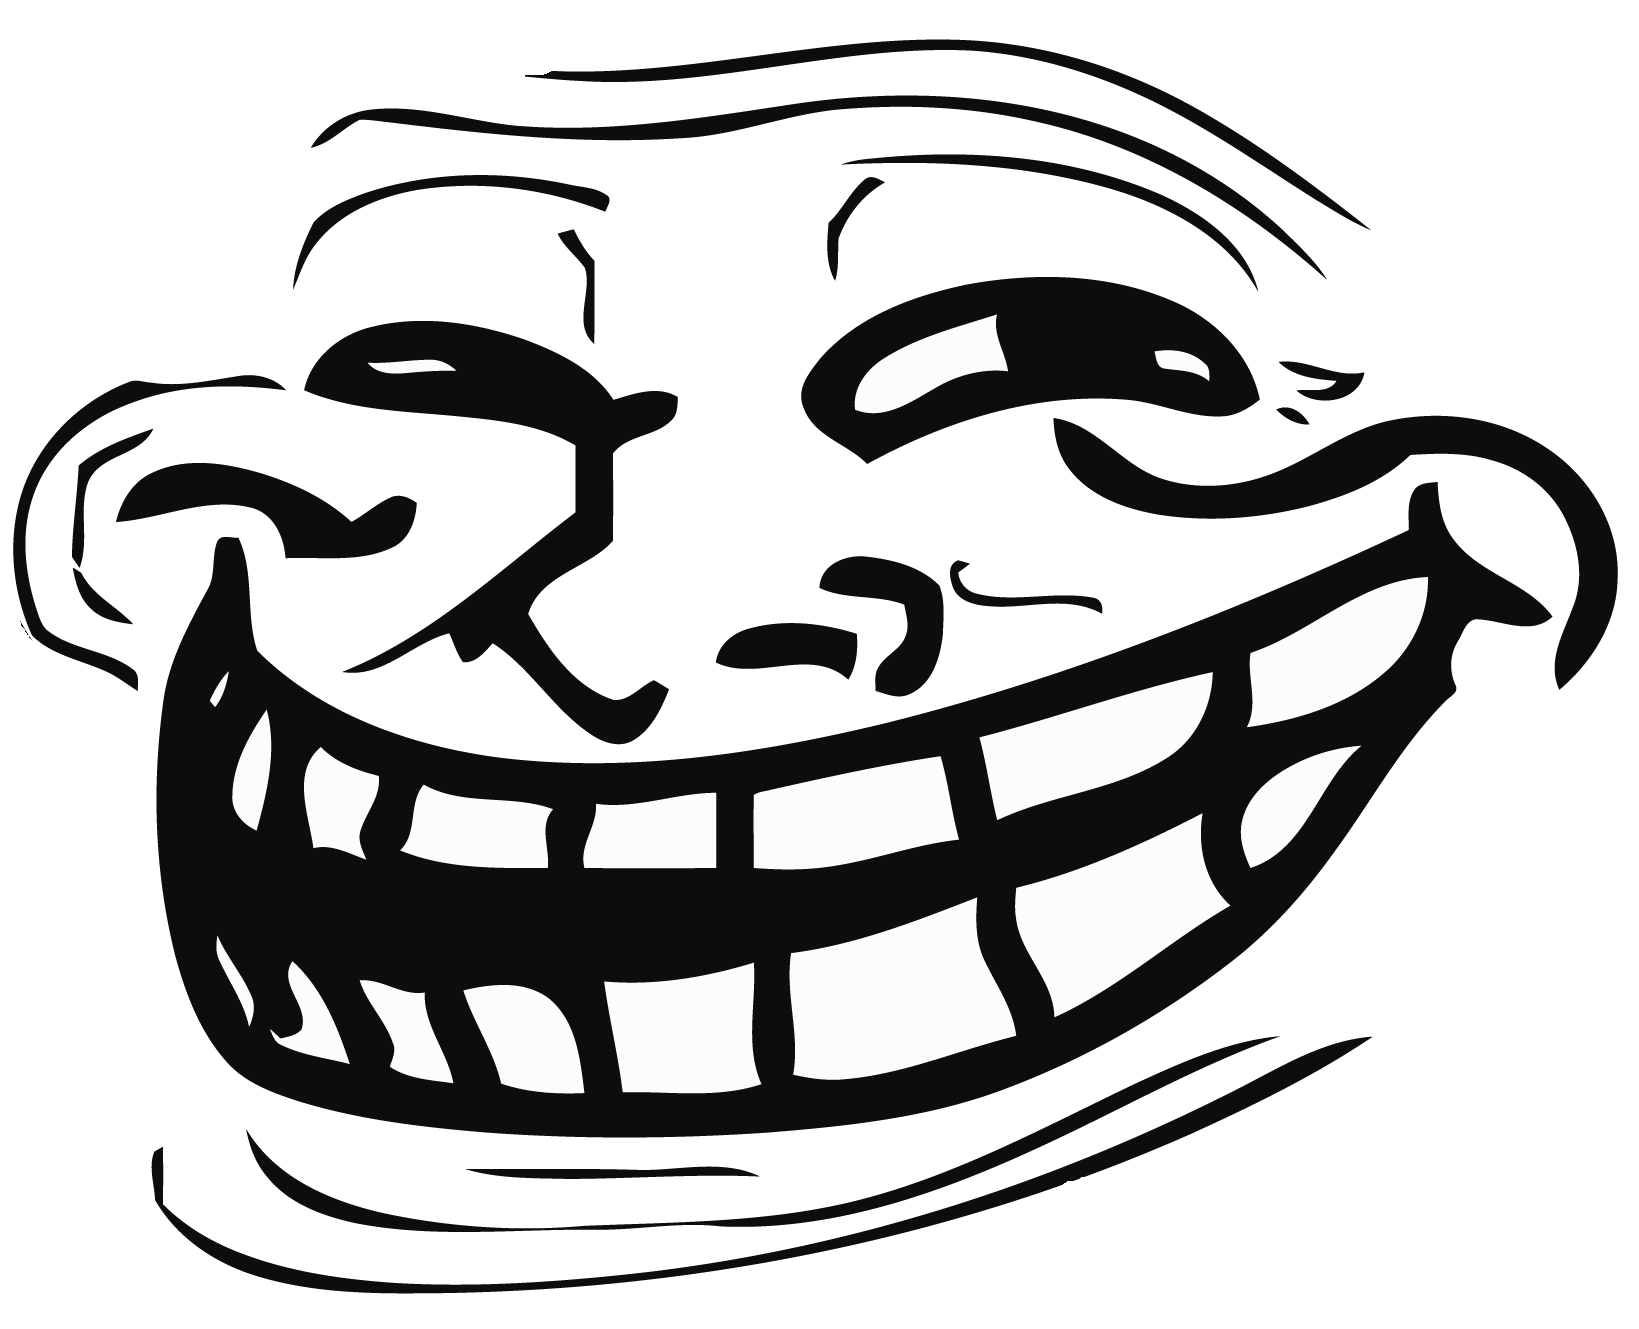 100+] Troll Face Pictures